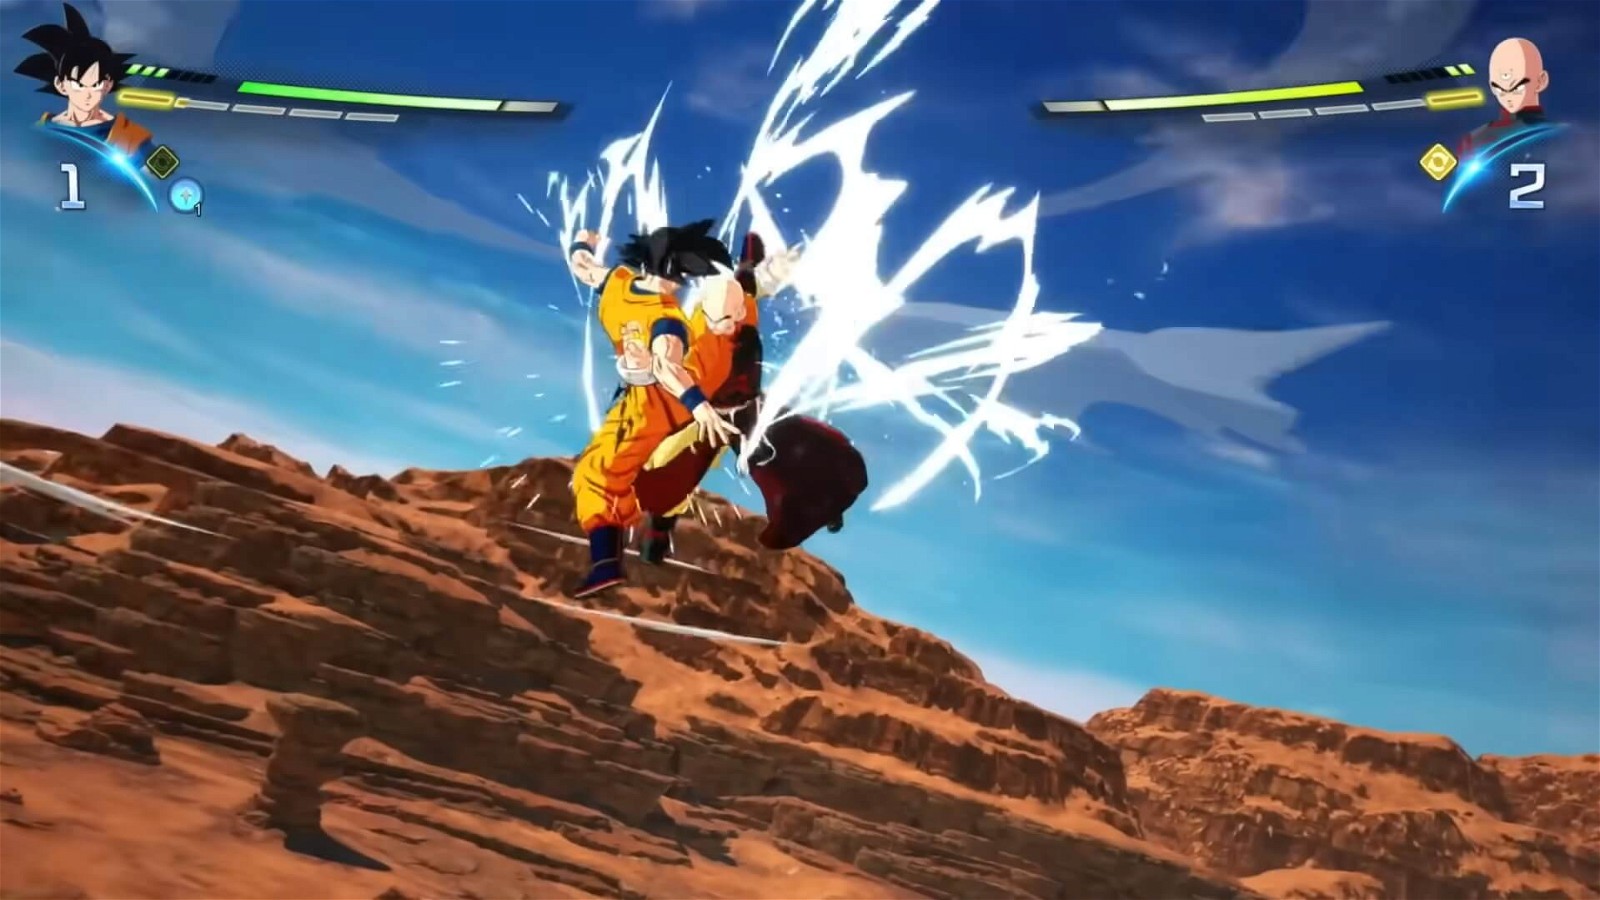 Goku and Tien Shinhan during a hand-to-hand combat in Dragon Ball: Sparking Zero. Credits: AfroSenju XL on YouTube